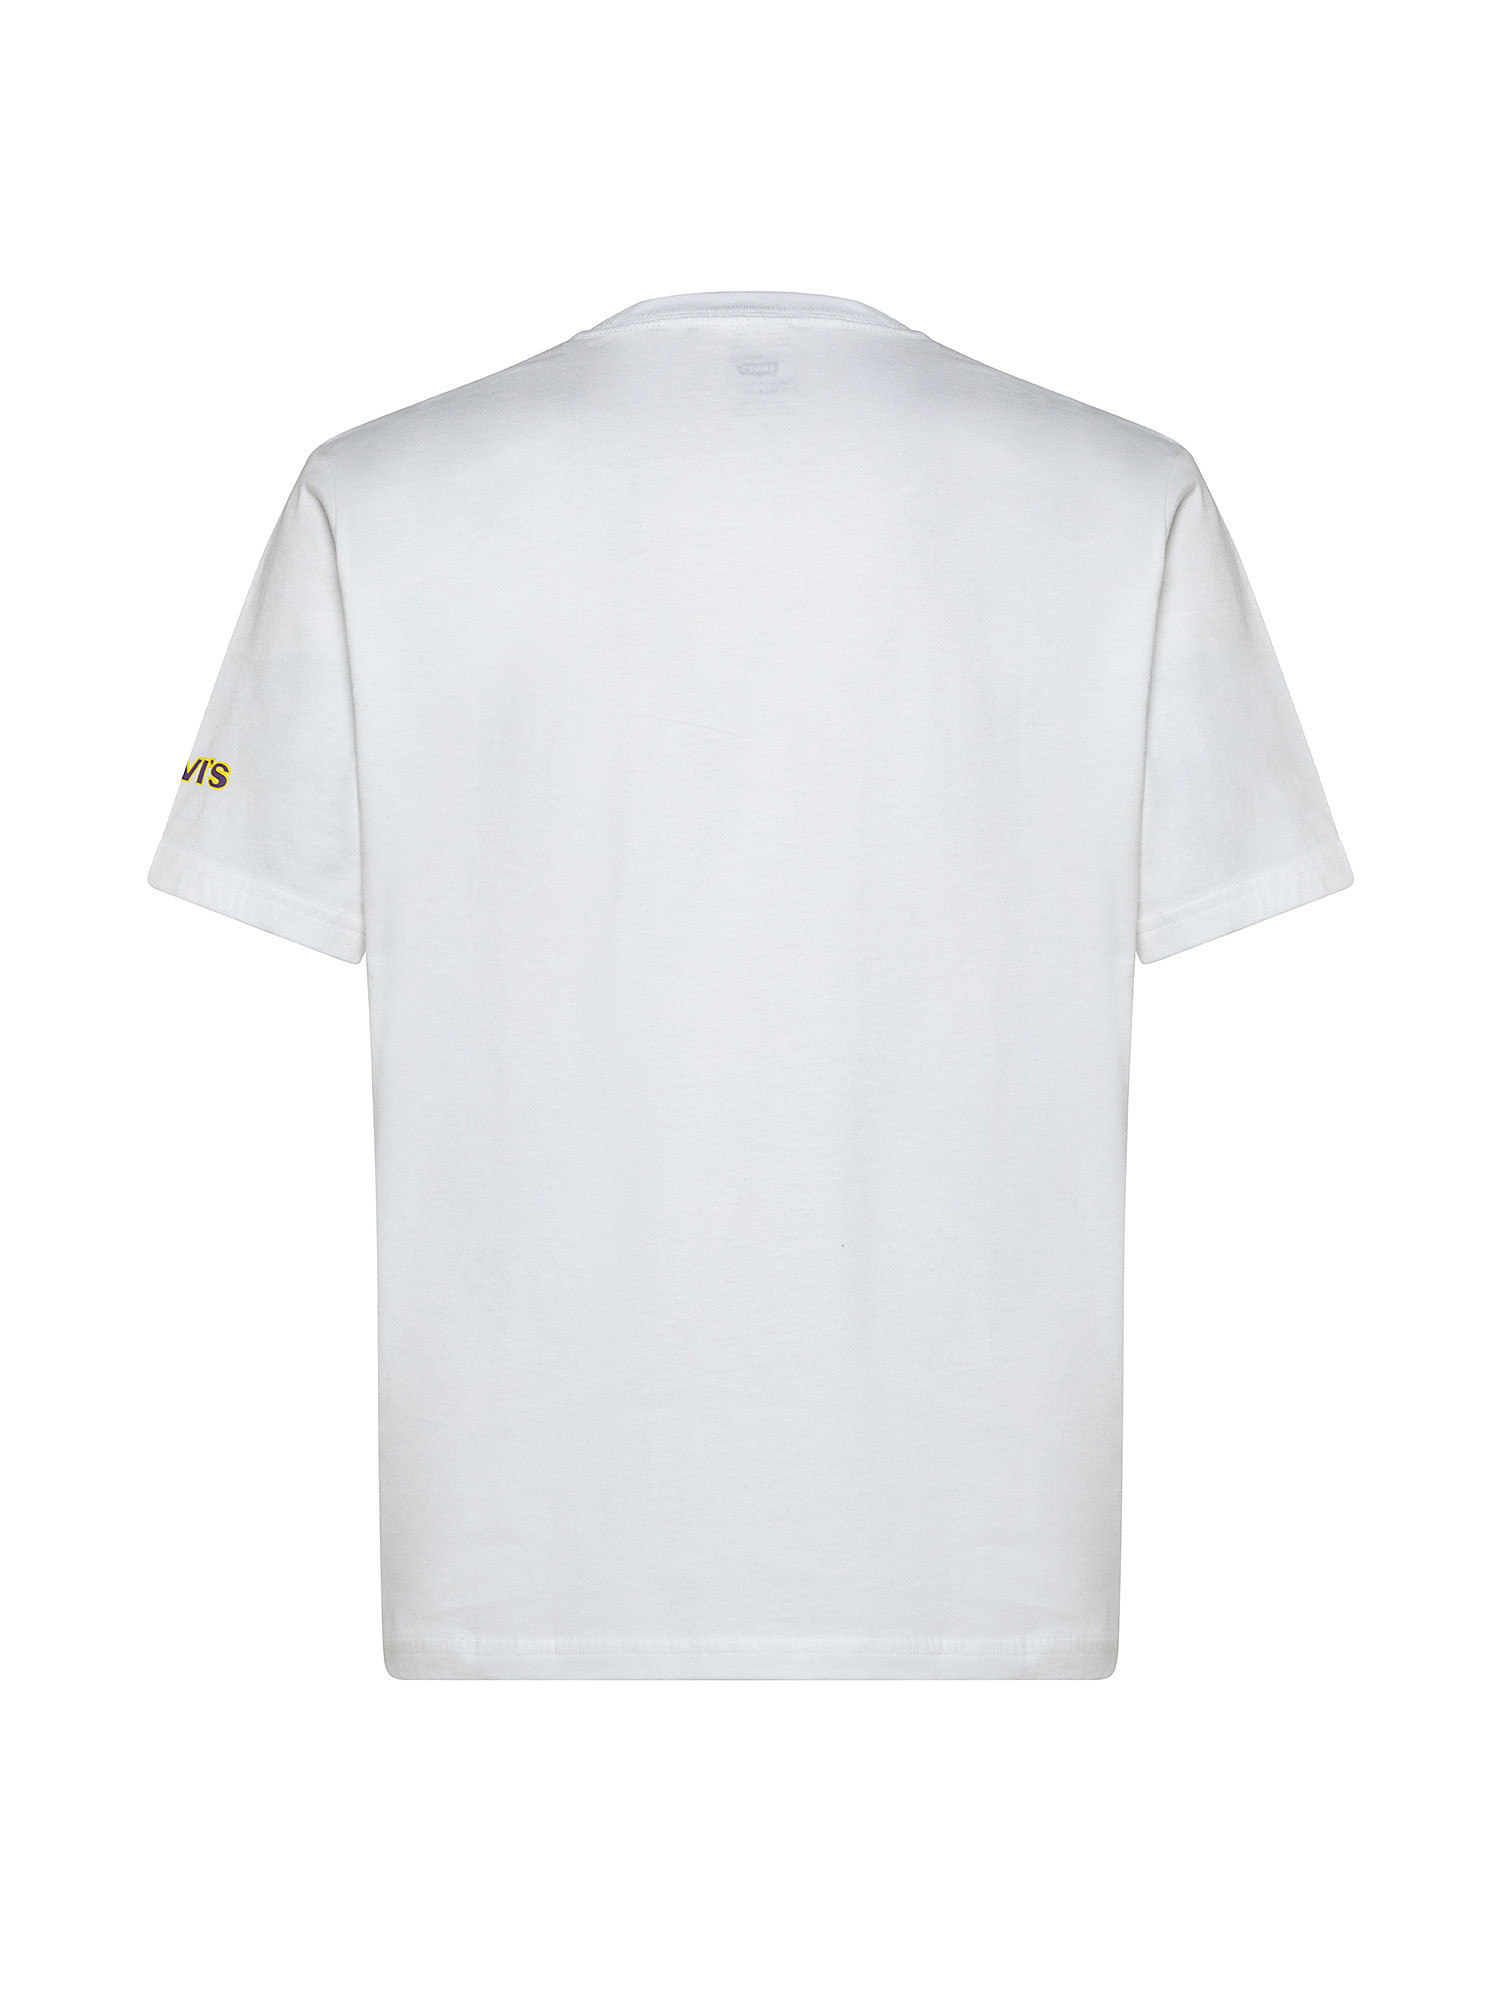 Graphic Tee, Bianco, large image number 1